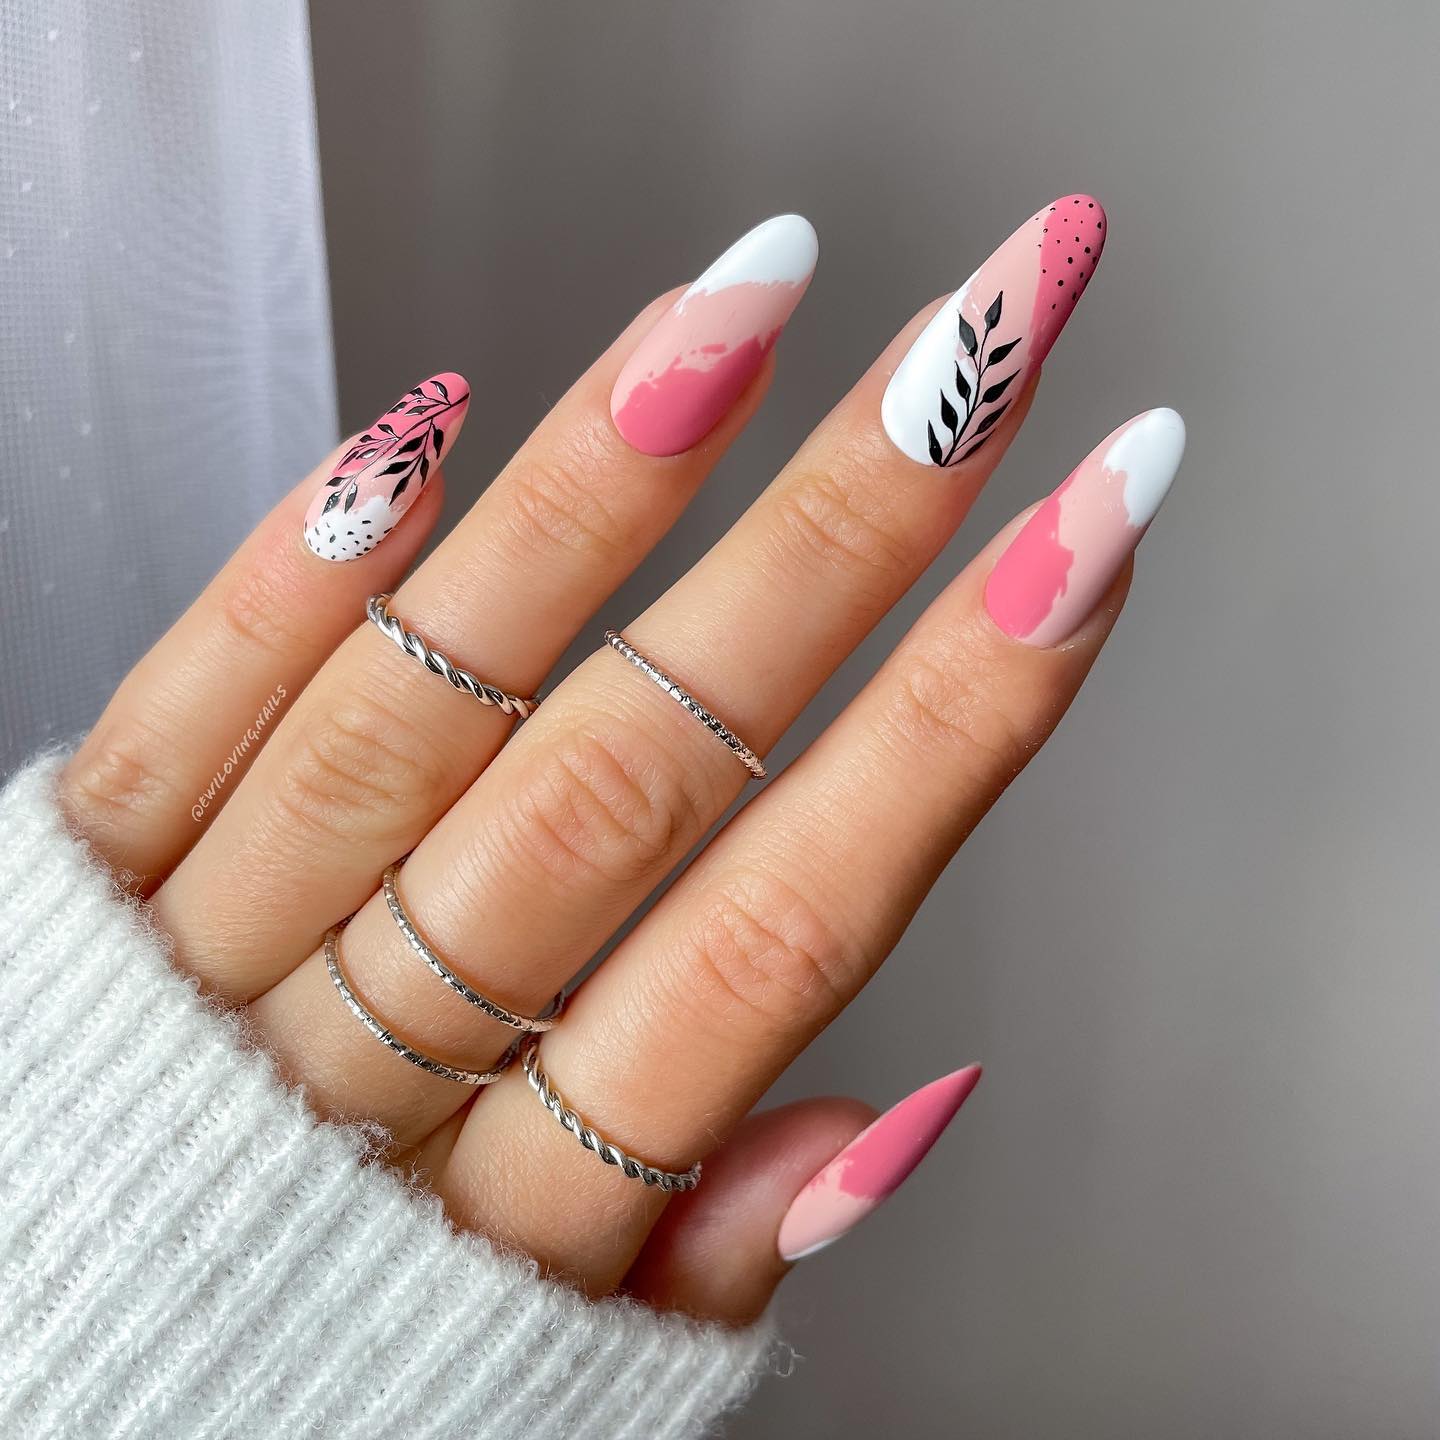 50 Best Nail Designs Trends To Try Out In 2022 images 34